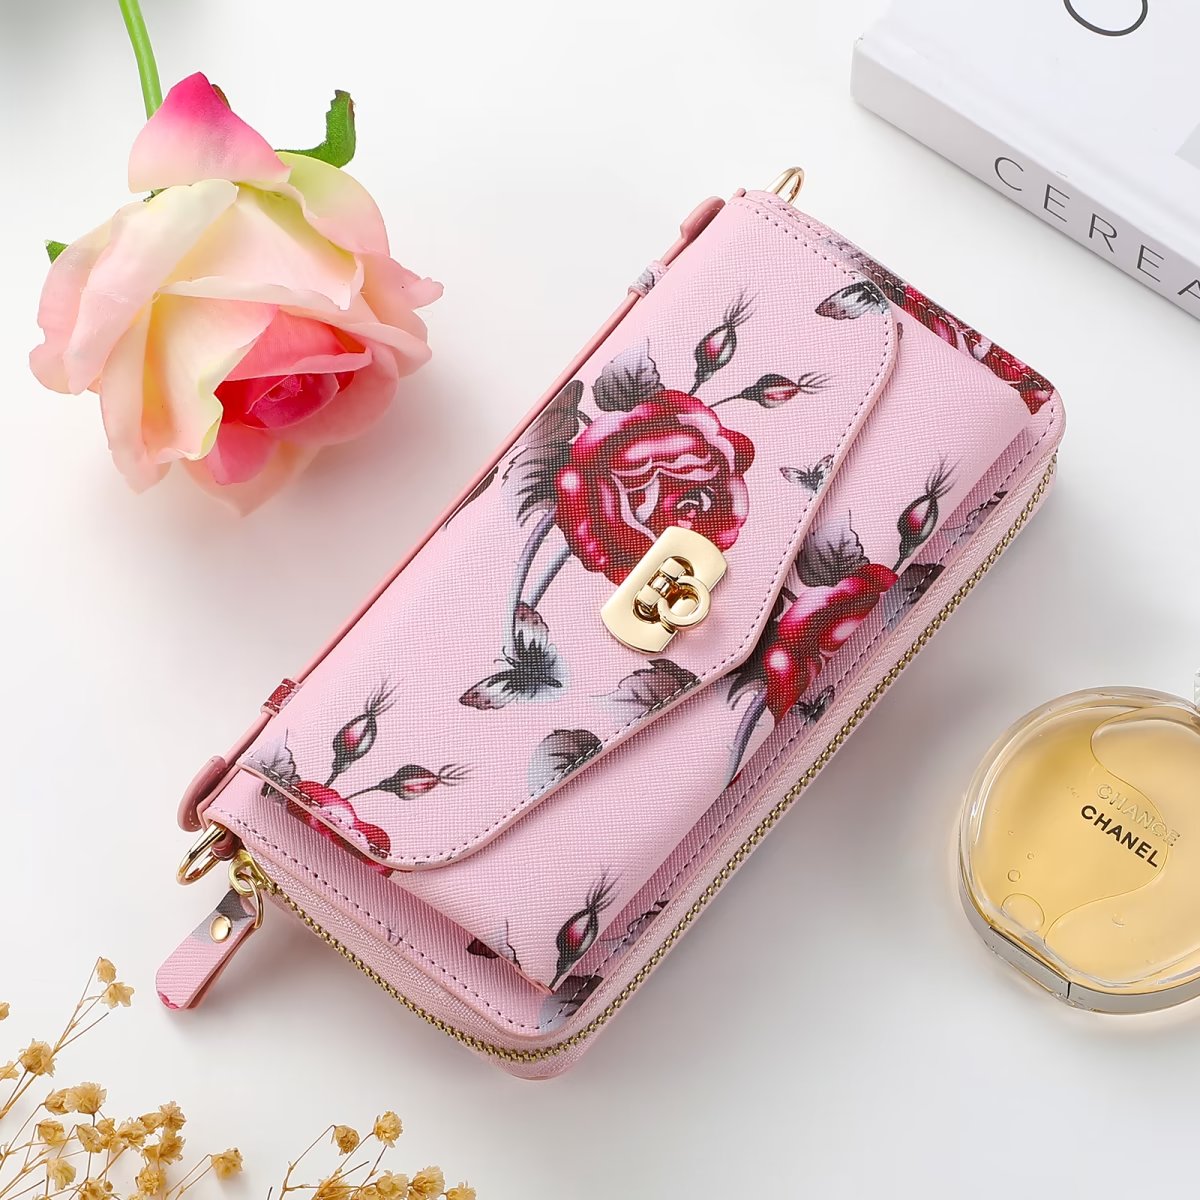 Flower Embellished Zipper Purse and Wallet Duo Case - Samsung